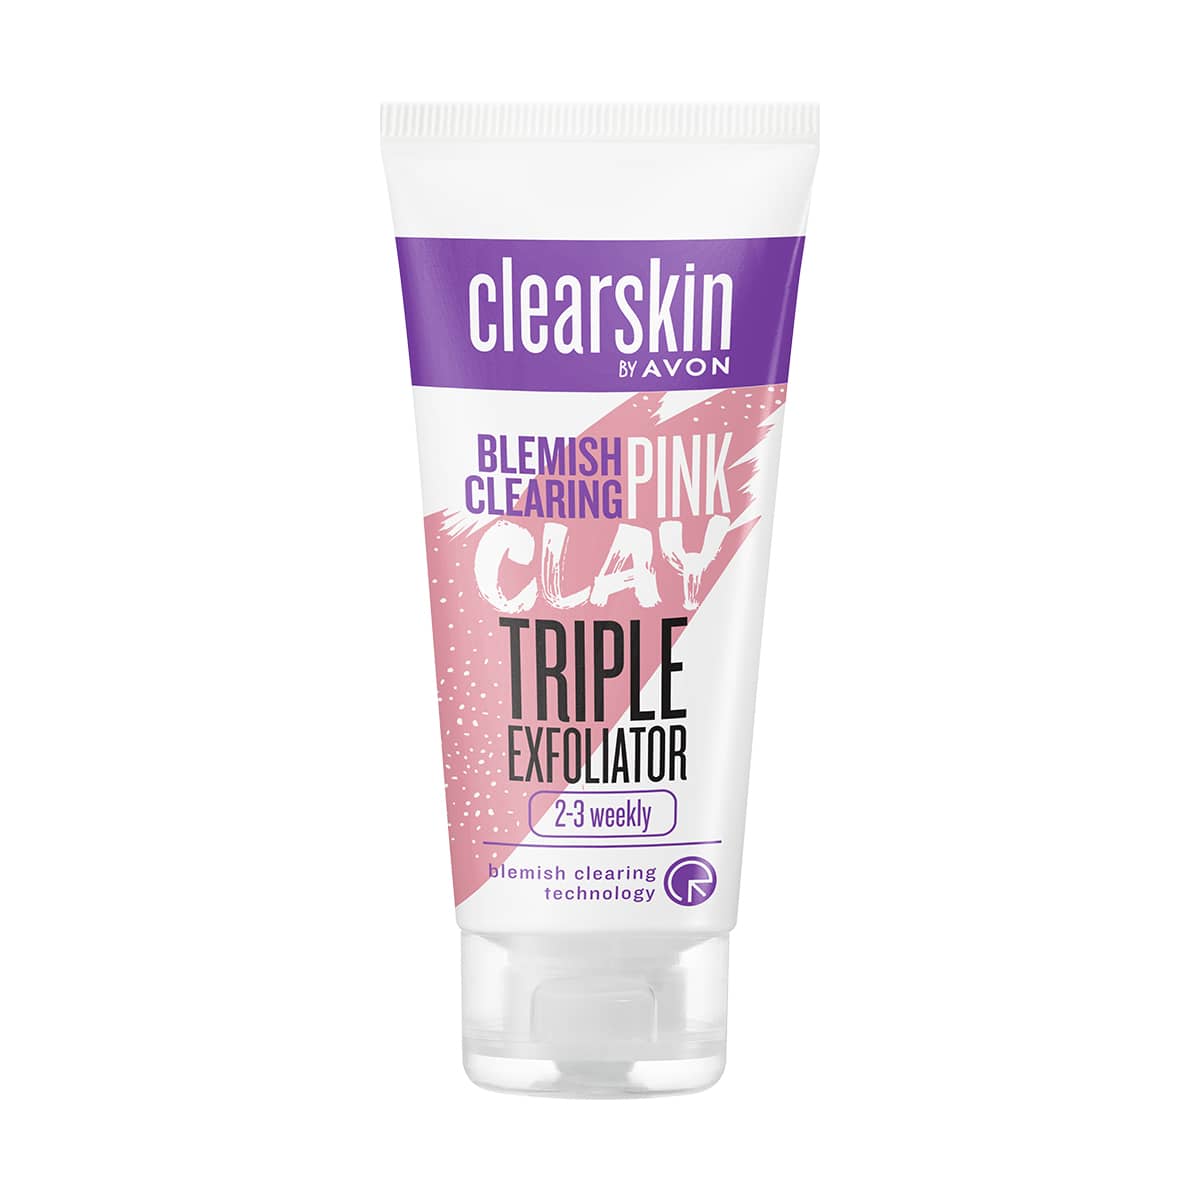 Clearskin Blemish Clearing Pink Clay Triple Exfoliator 75ml